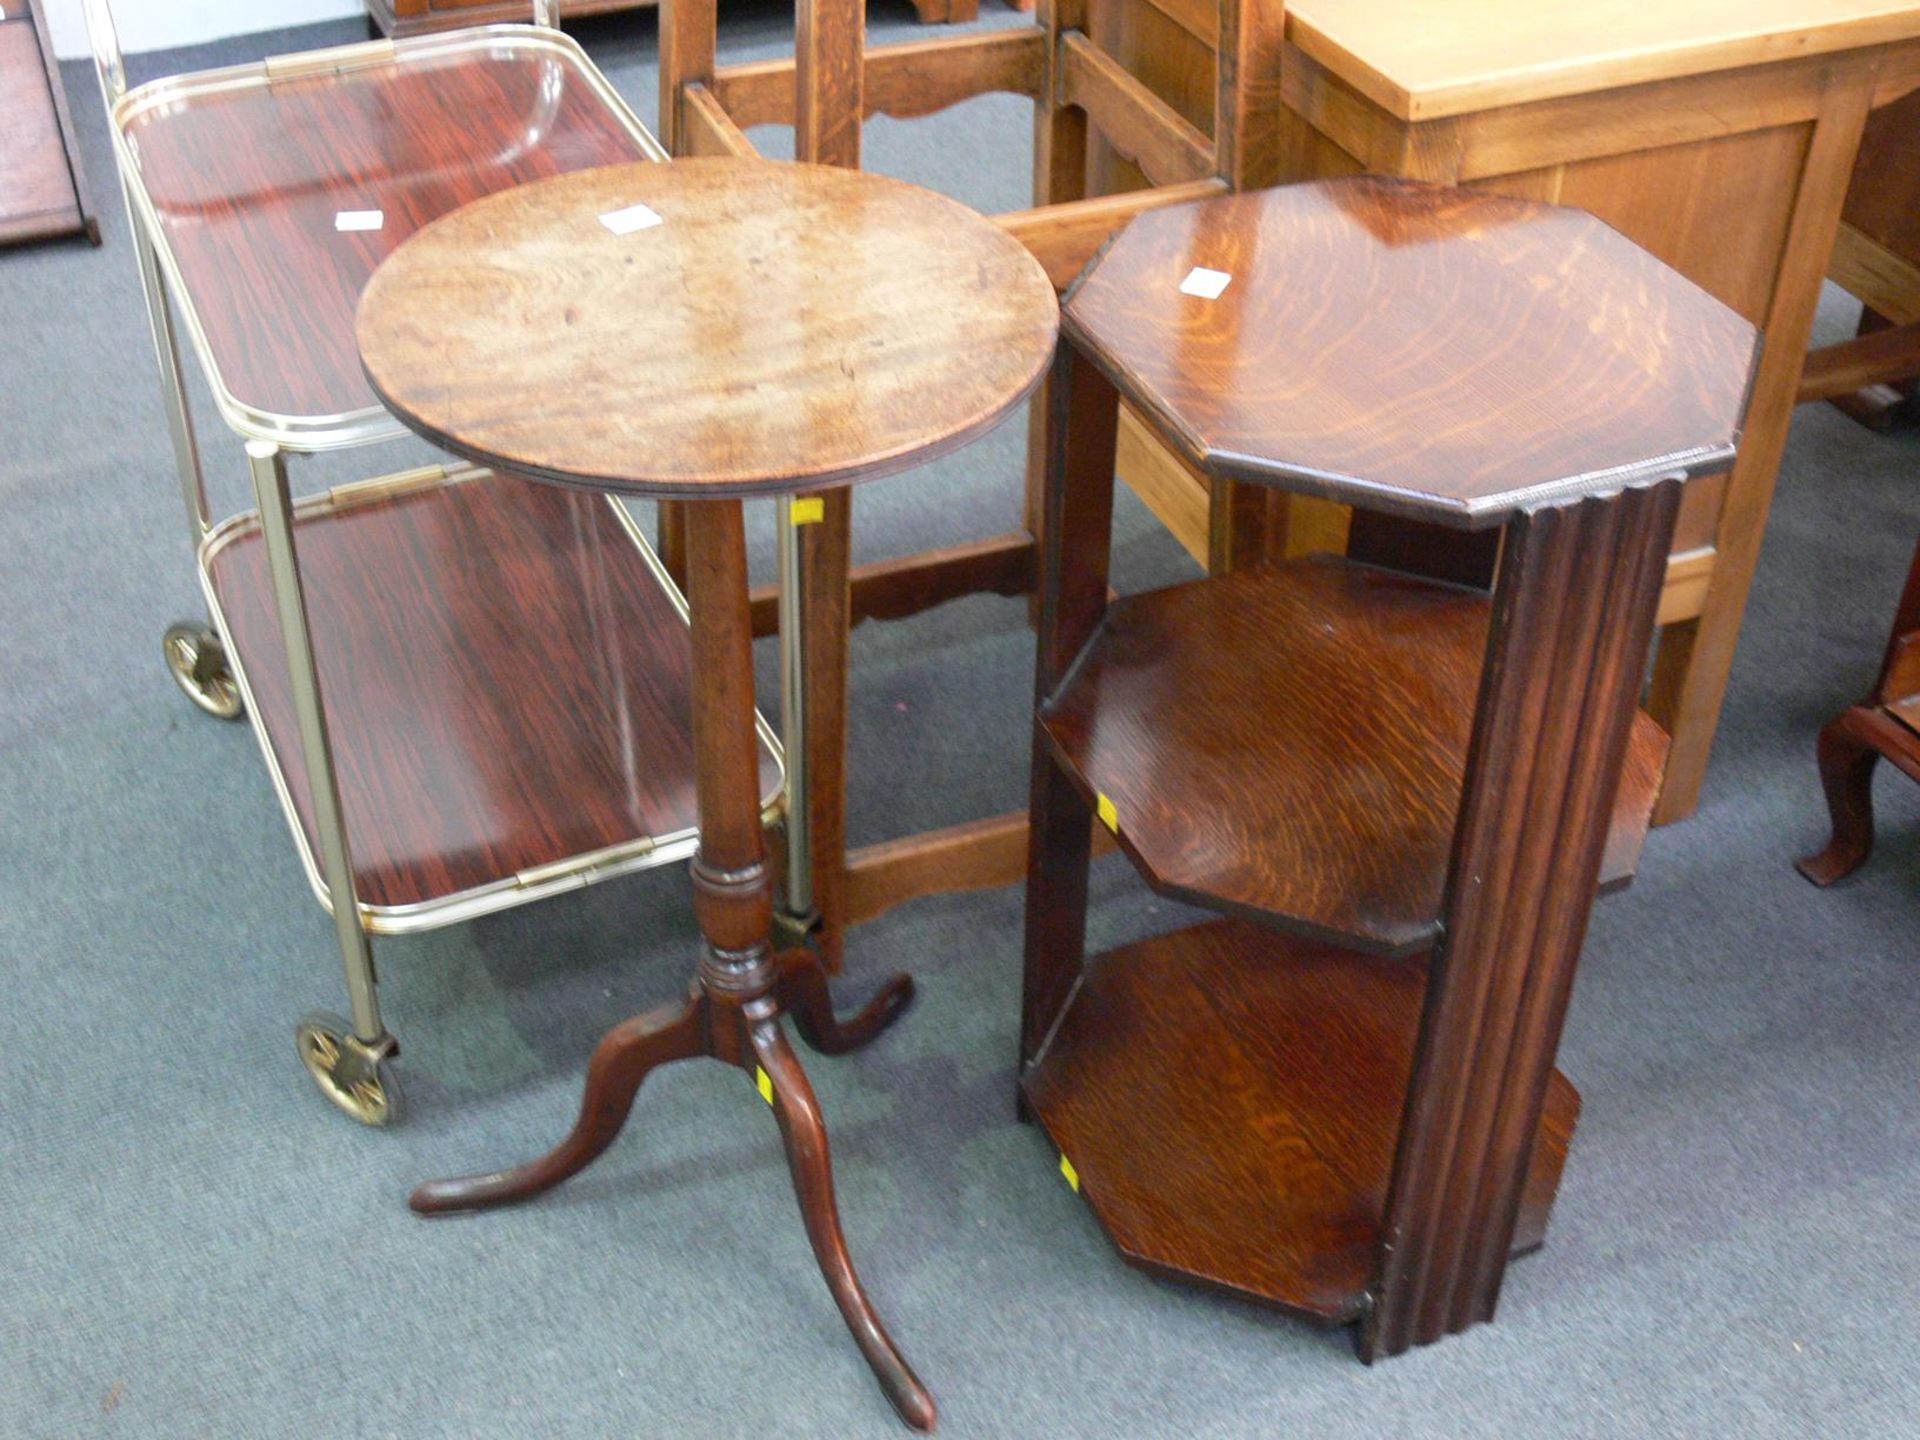 A tall Coat/Hatstand (H187.5cm W40cm D40cm) together with a Octagonal Occasional Table with two